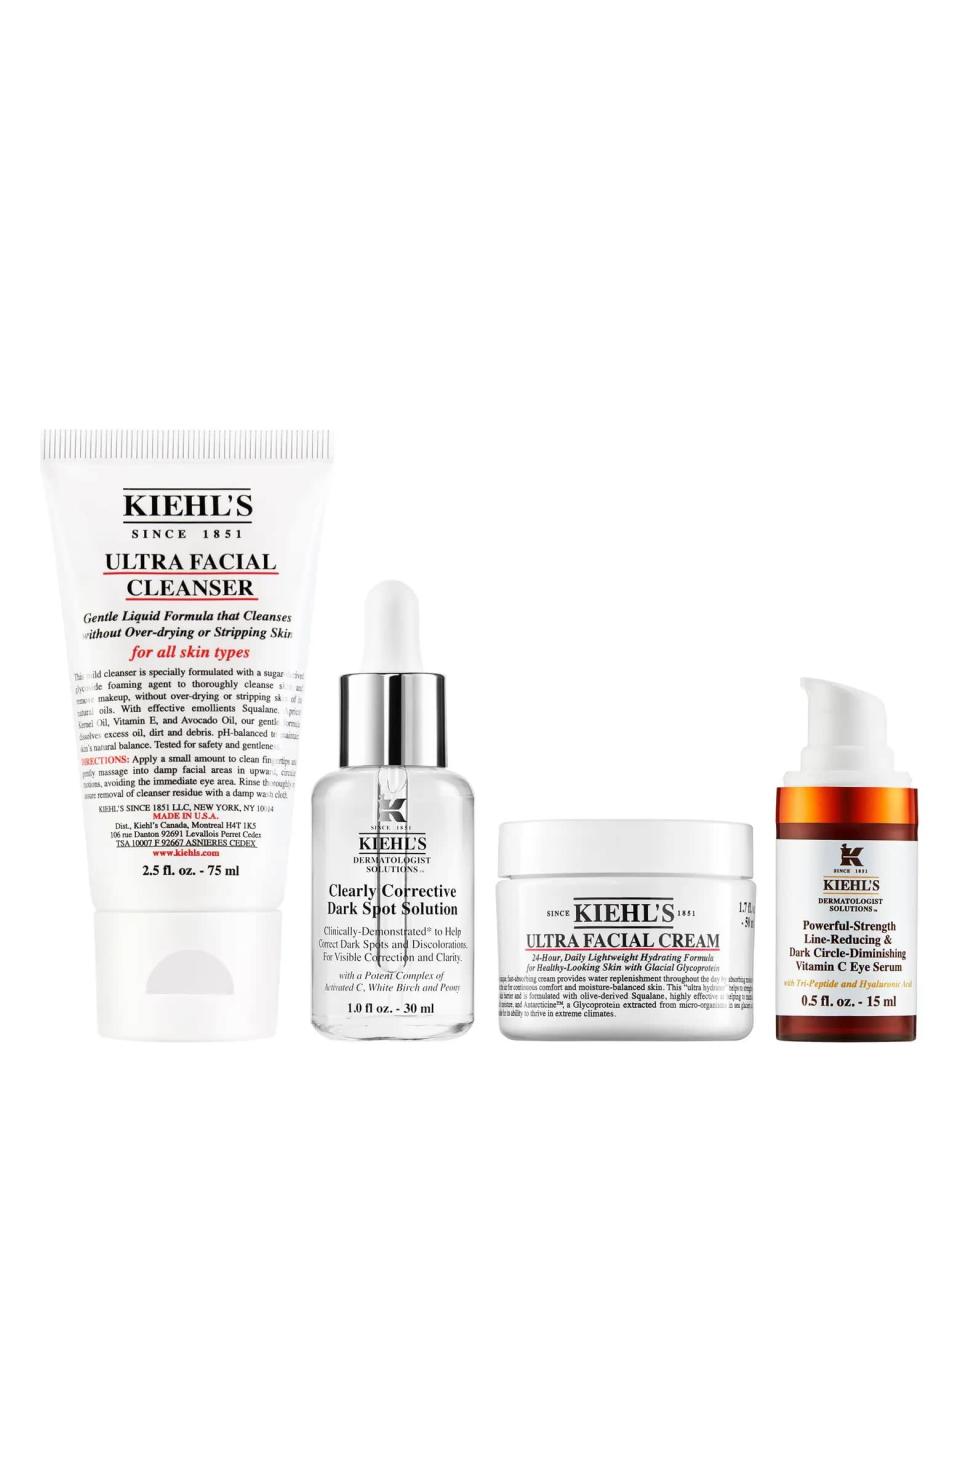 <p>Brighten up dark spots and your complexion with the <span>Kiehl's Brighten Up &amp; Glow Skin Care Set</span> ($60, originally $92). It contains a travel-size Ultra Facial Cleanser, a full-size Clearly Corrective Dark Spot Solution Face Serum, a full-size Ultra Facial Cream, and a full-size Powerful-Strength Dark Circle Reducing Vitamin C Eye Serum.</p>